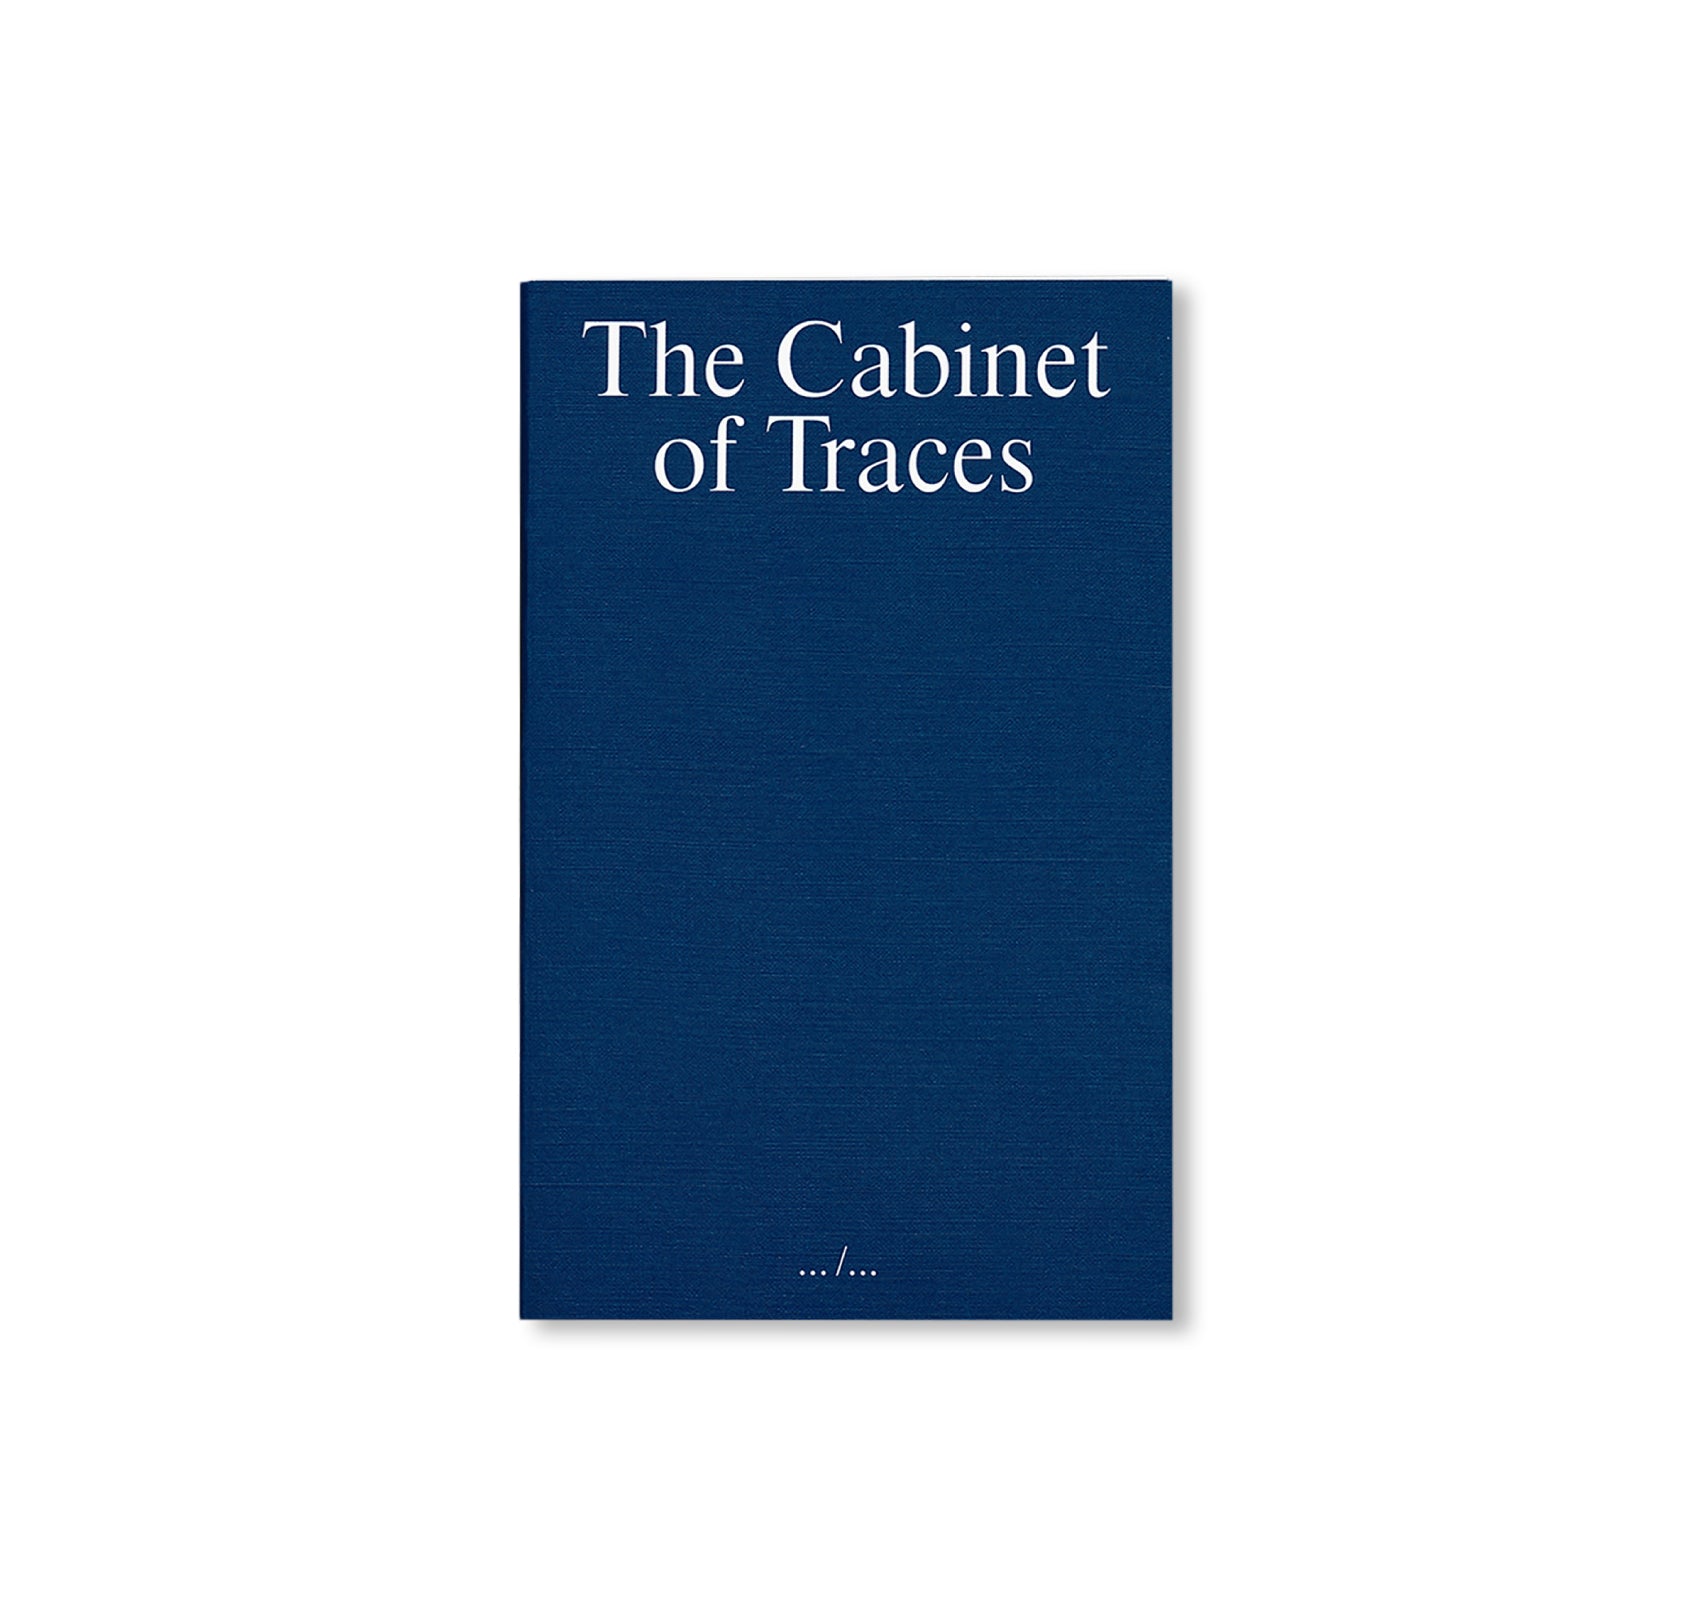 THE CABINET OF TRACES